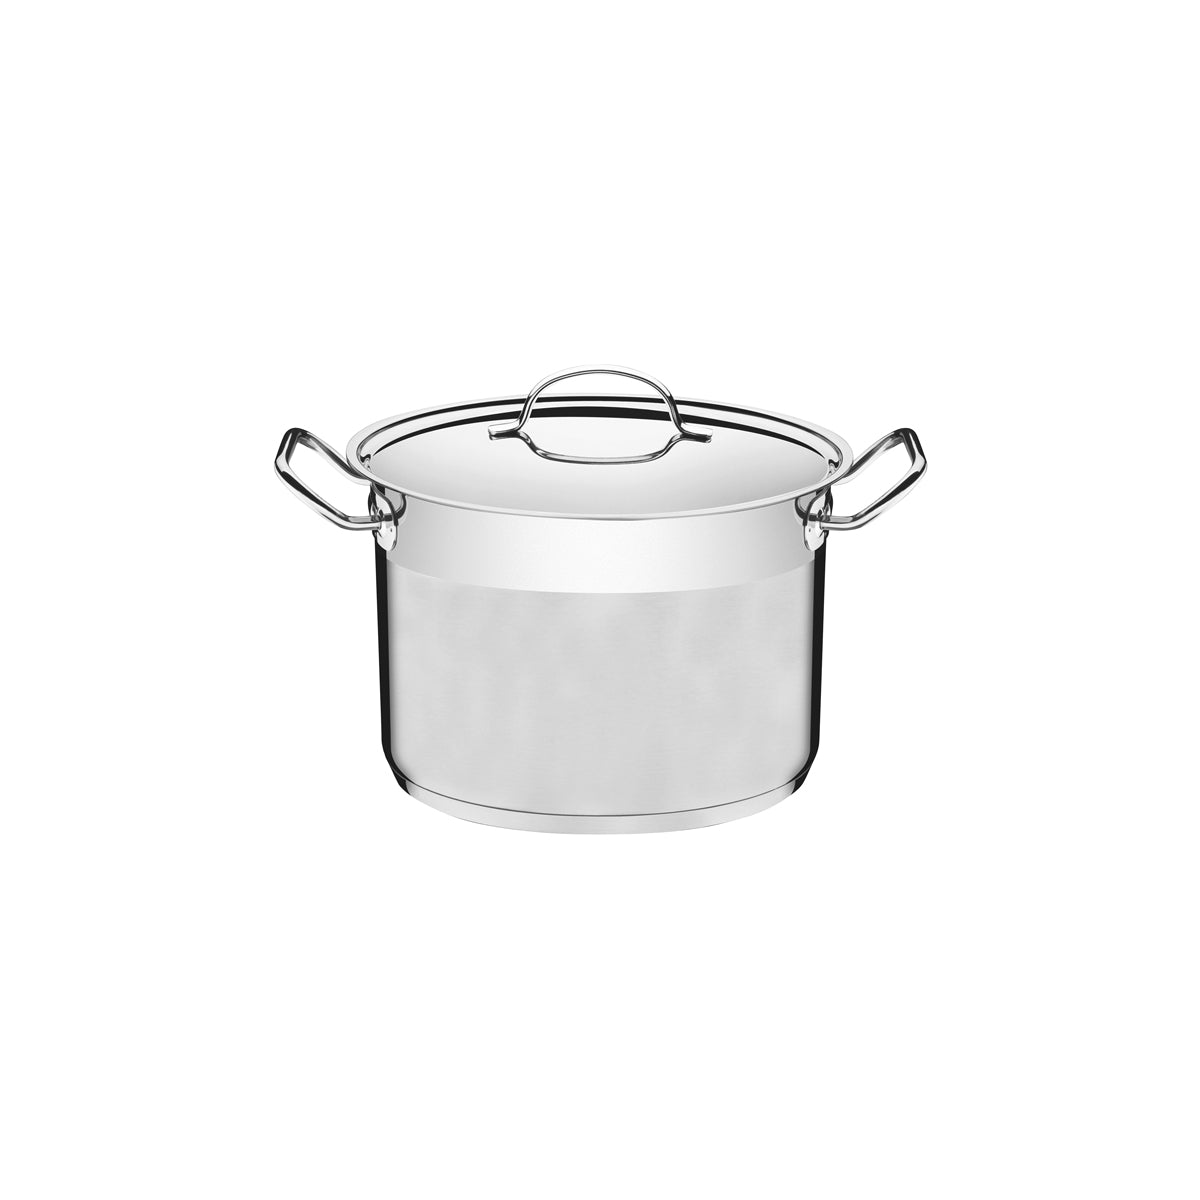 TM62625/241 Tramontina Professional Stock Pot with Lid Stainless Steel 240mm Tomkin Australia Hospitality Supplies